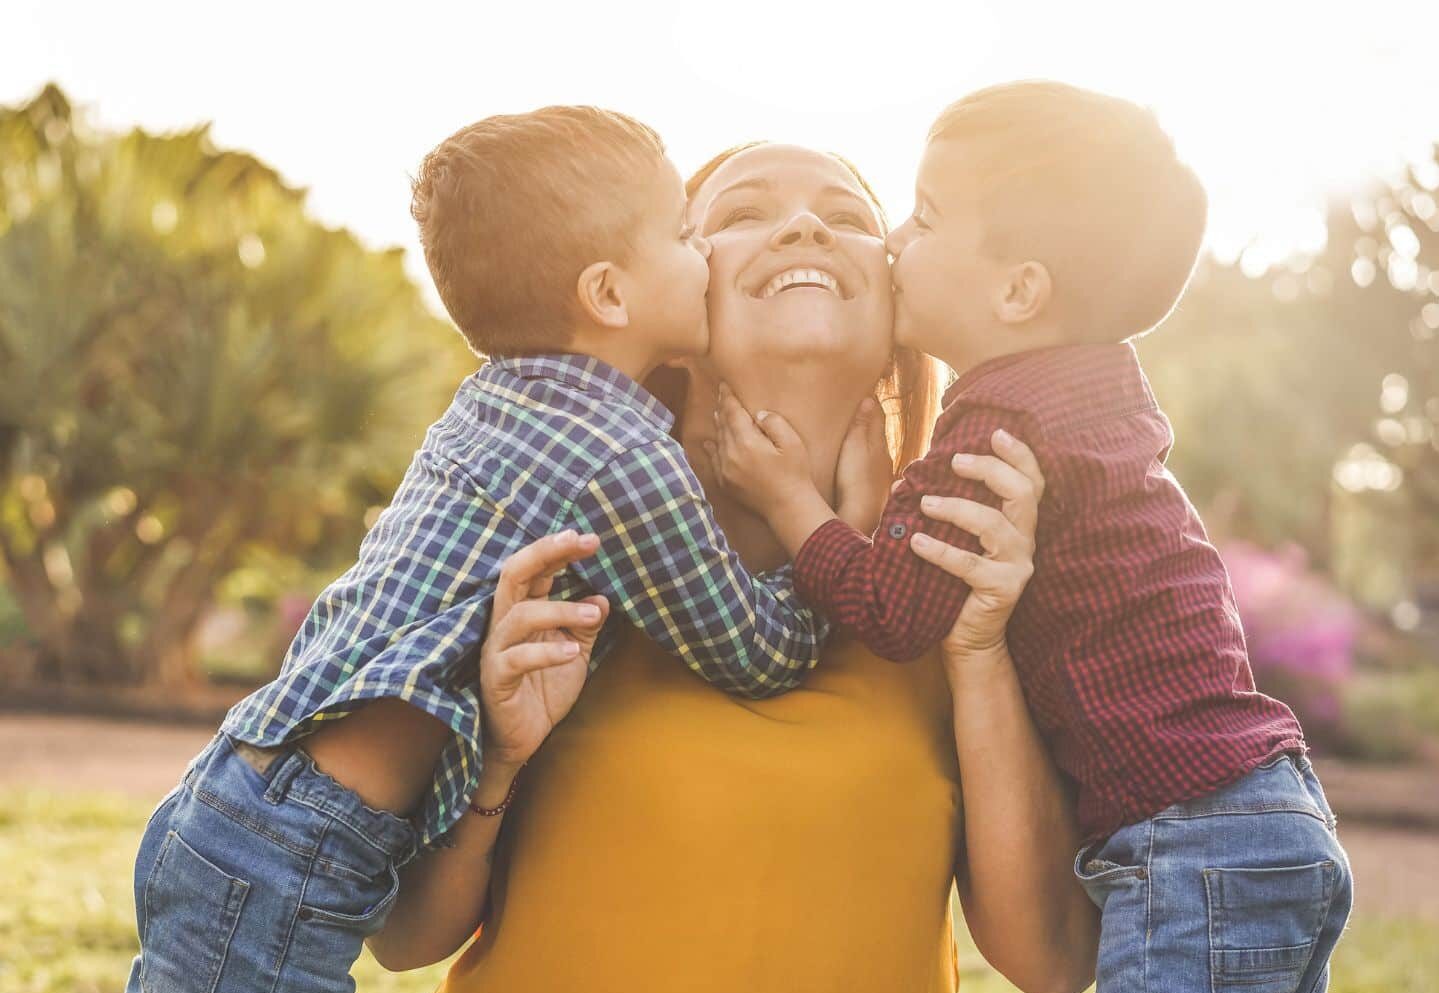 two boys kissing their mom: mom and son